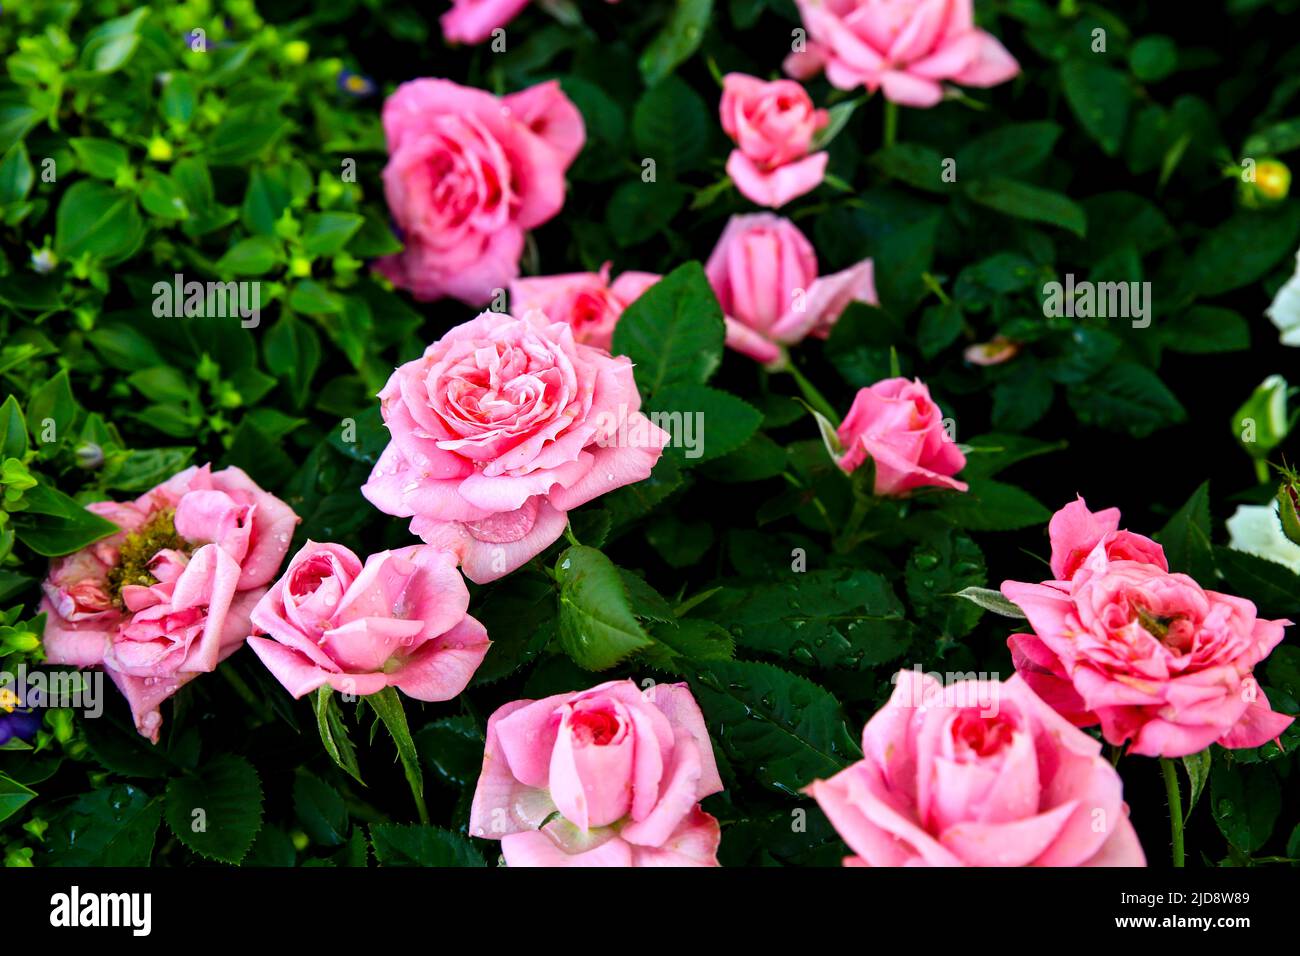 Beautiful and colorful Rosa Chinensis flowers in the garden under the sun Stock Photo